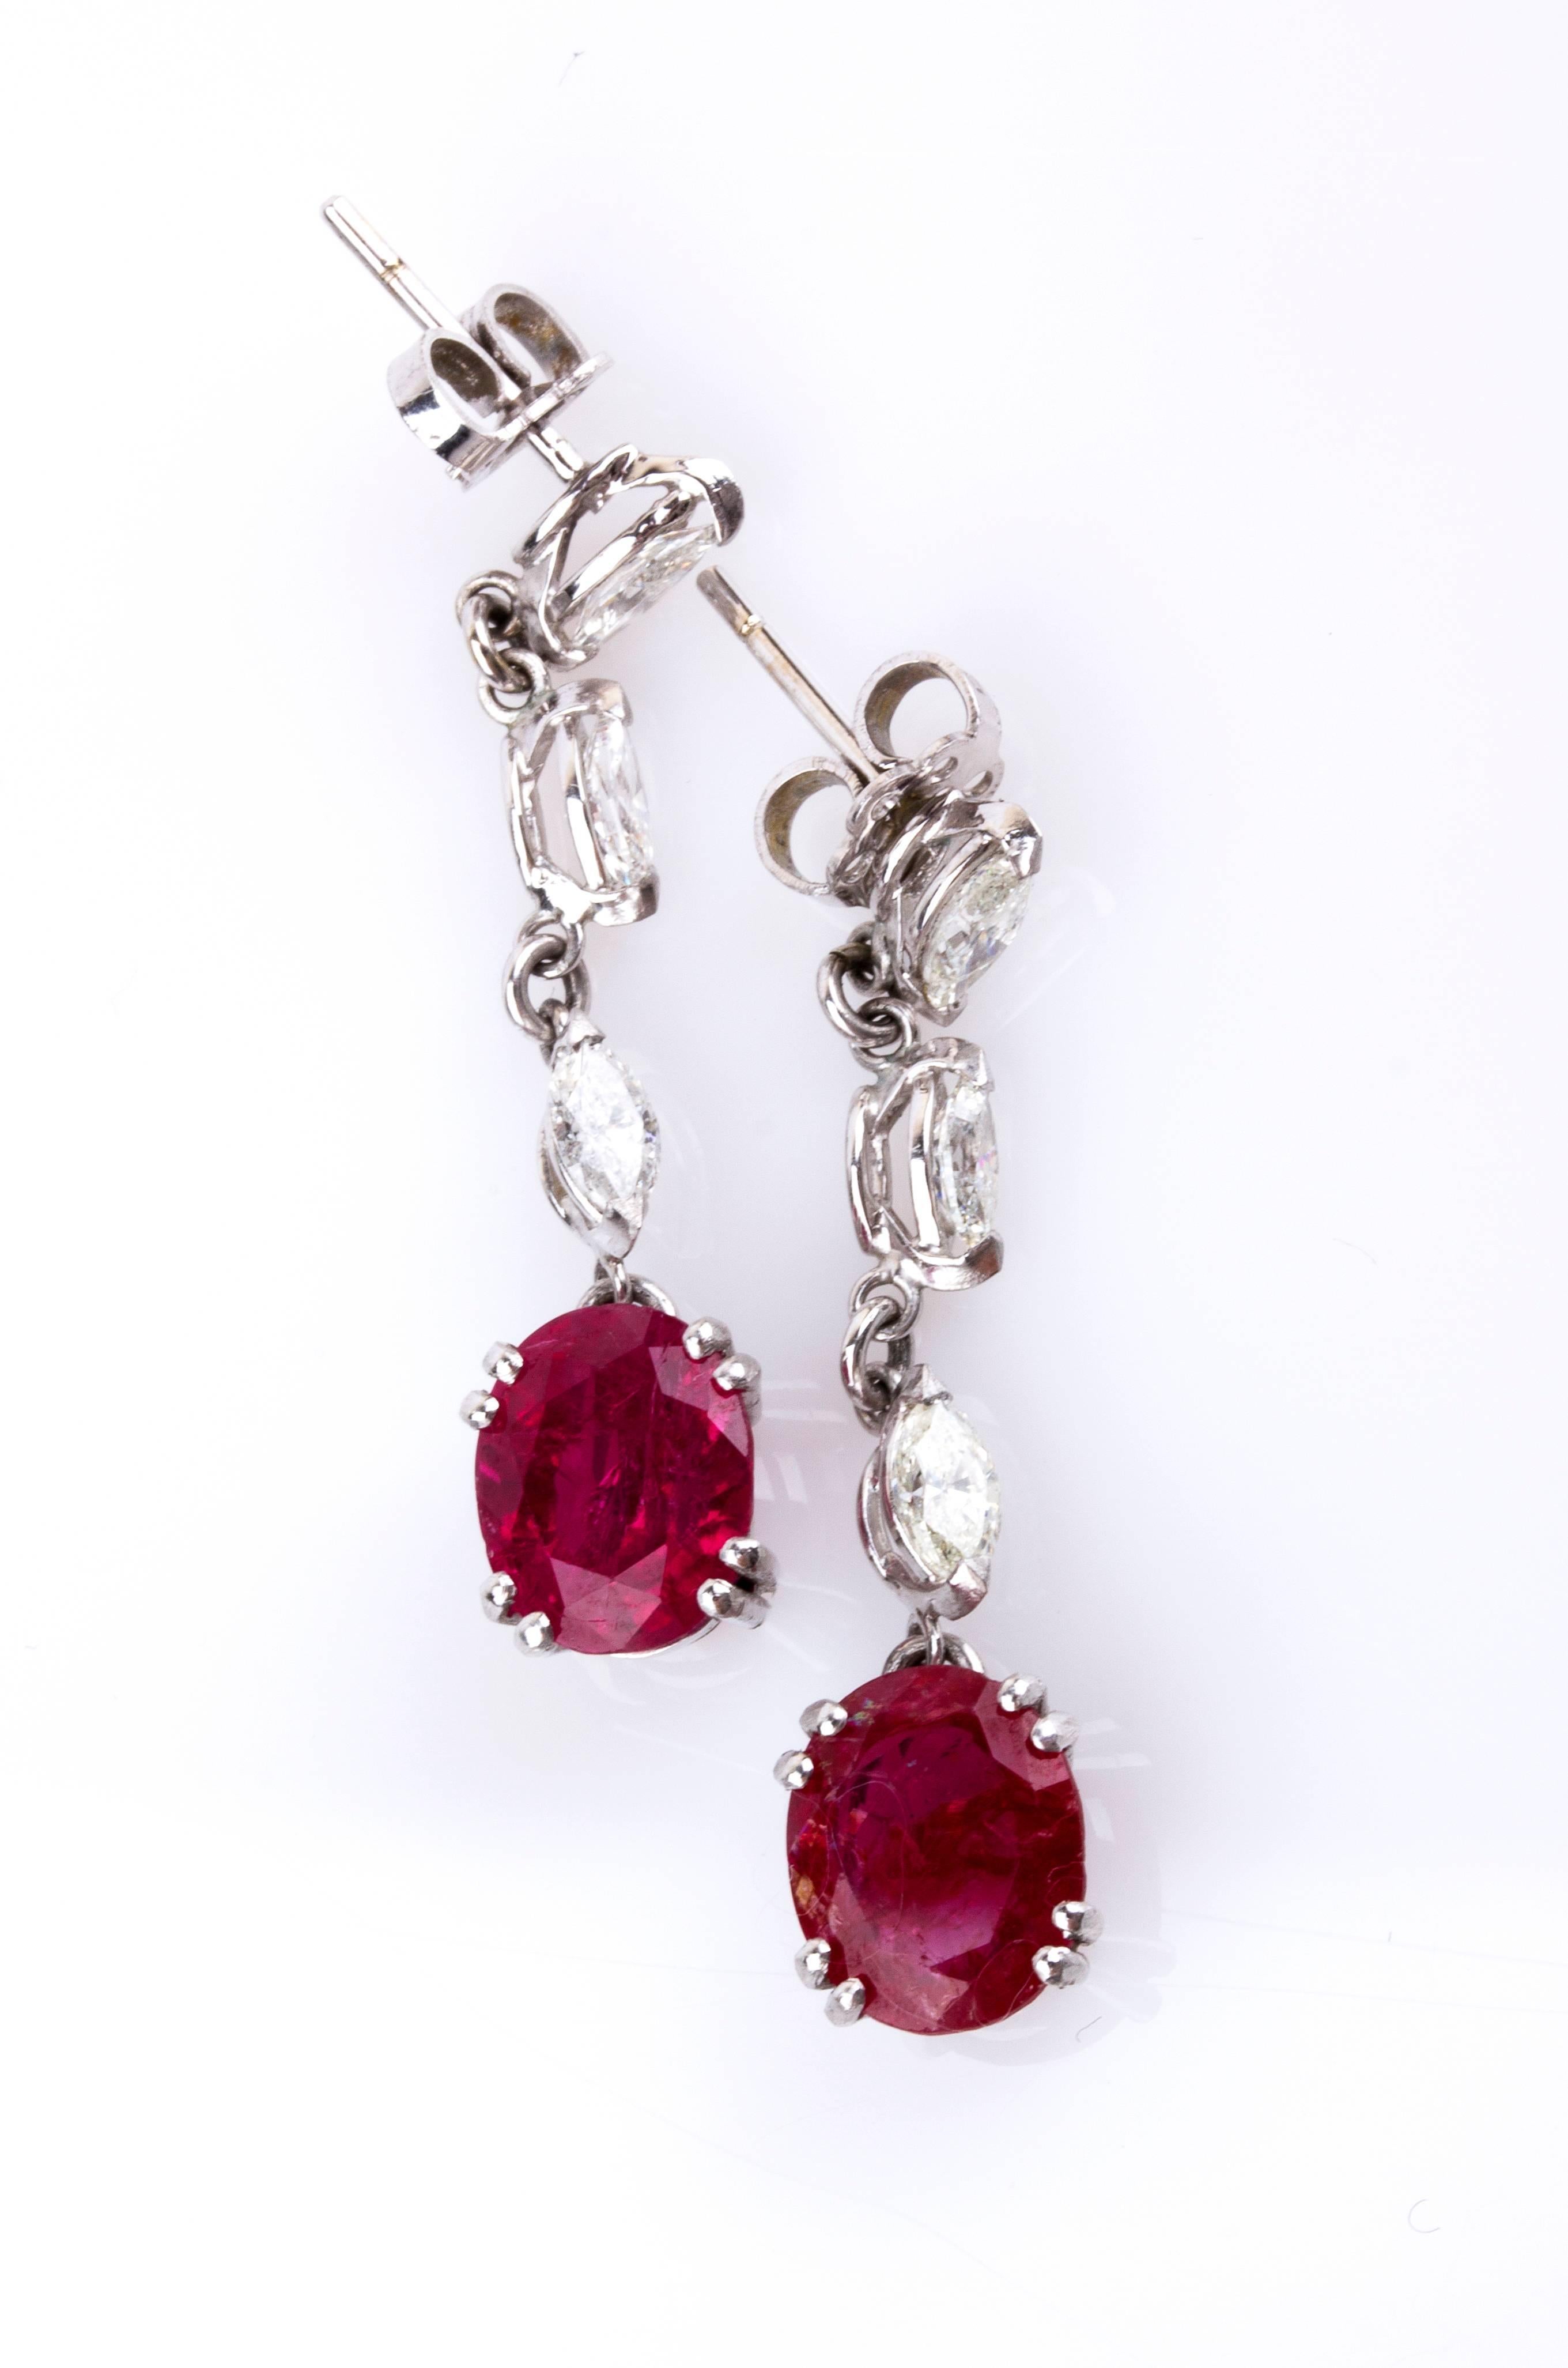 2 rubies total weighing 5.32 ct, each decorated by a line of three marquise shape diamonds weighing ct, H-I color, VS-SI clarity. Lenght 37 mm. Weight 5.61 gr. Italian assay mark 750. Accompanied by Masterstones report no. 317CT108 dated 18th of